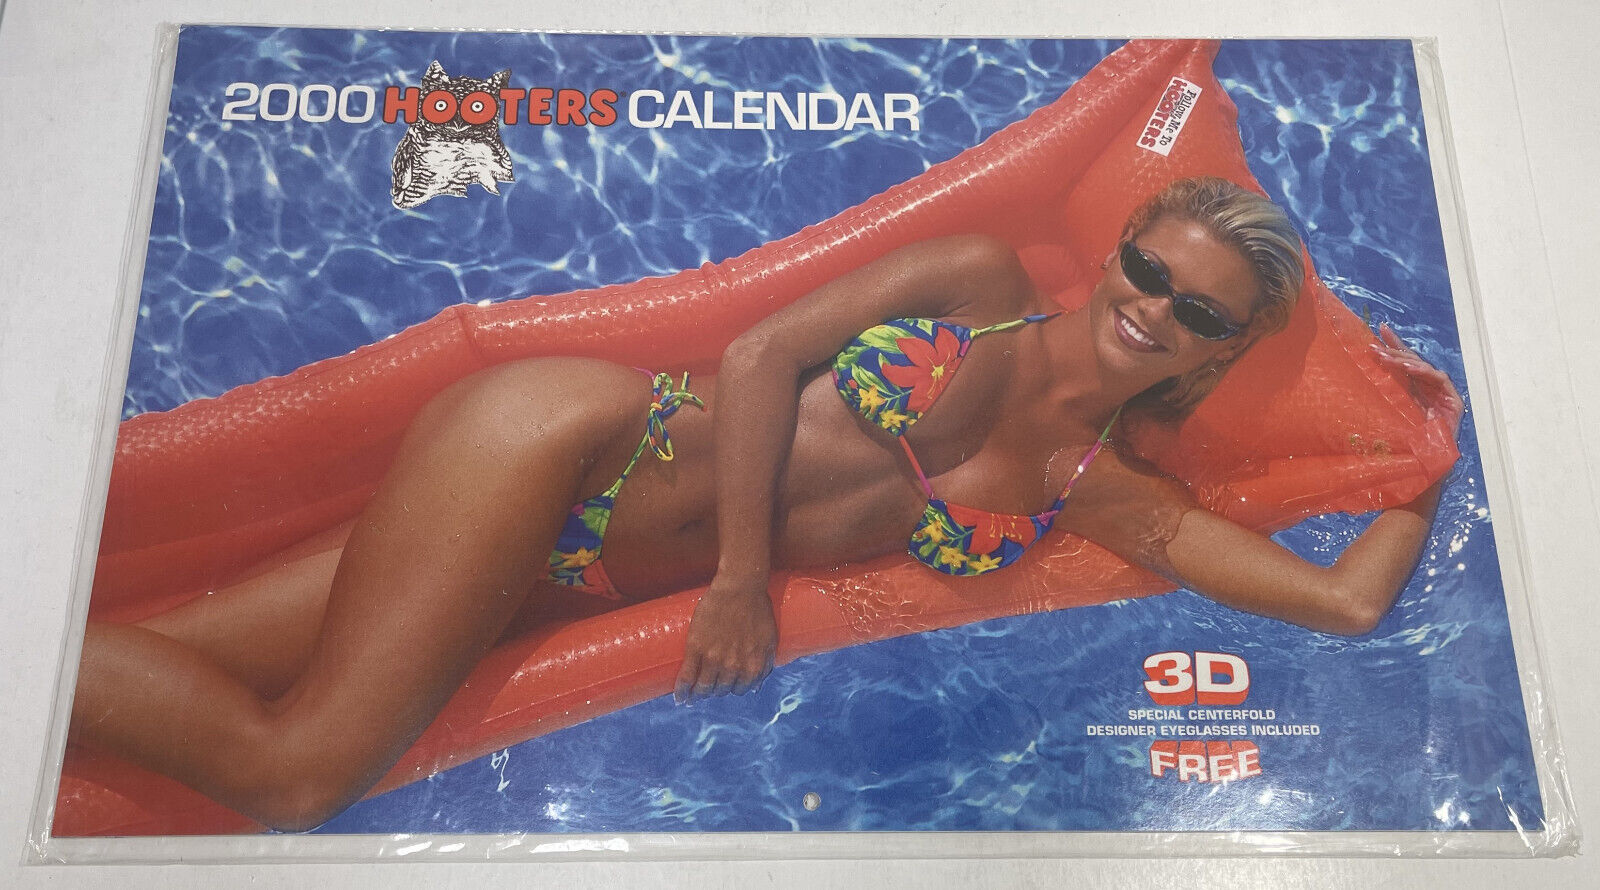 Hooters Girls 2000 Calendar, Official Licensed Product, 3D Centerfold, NEW